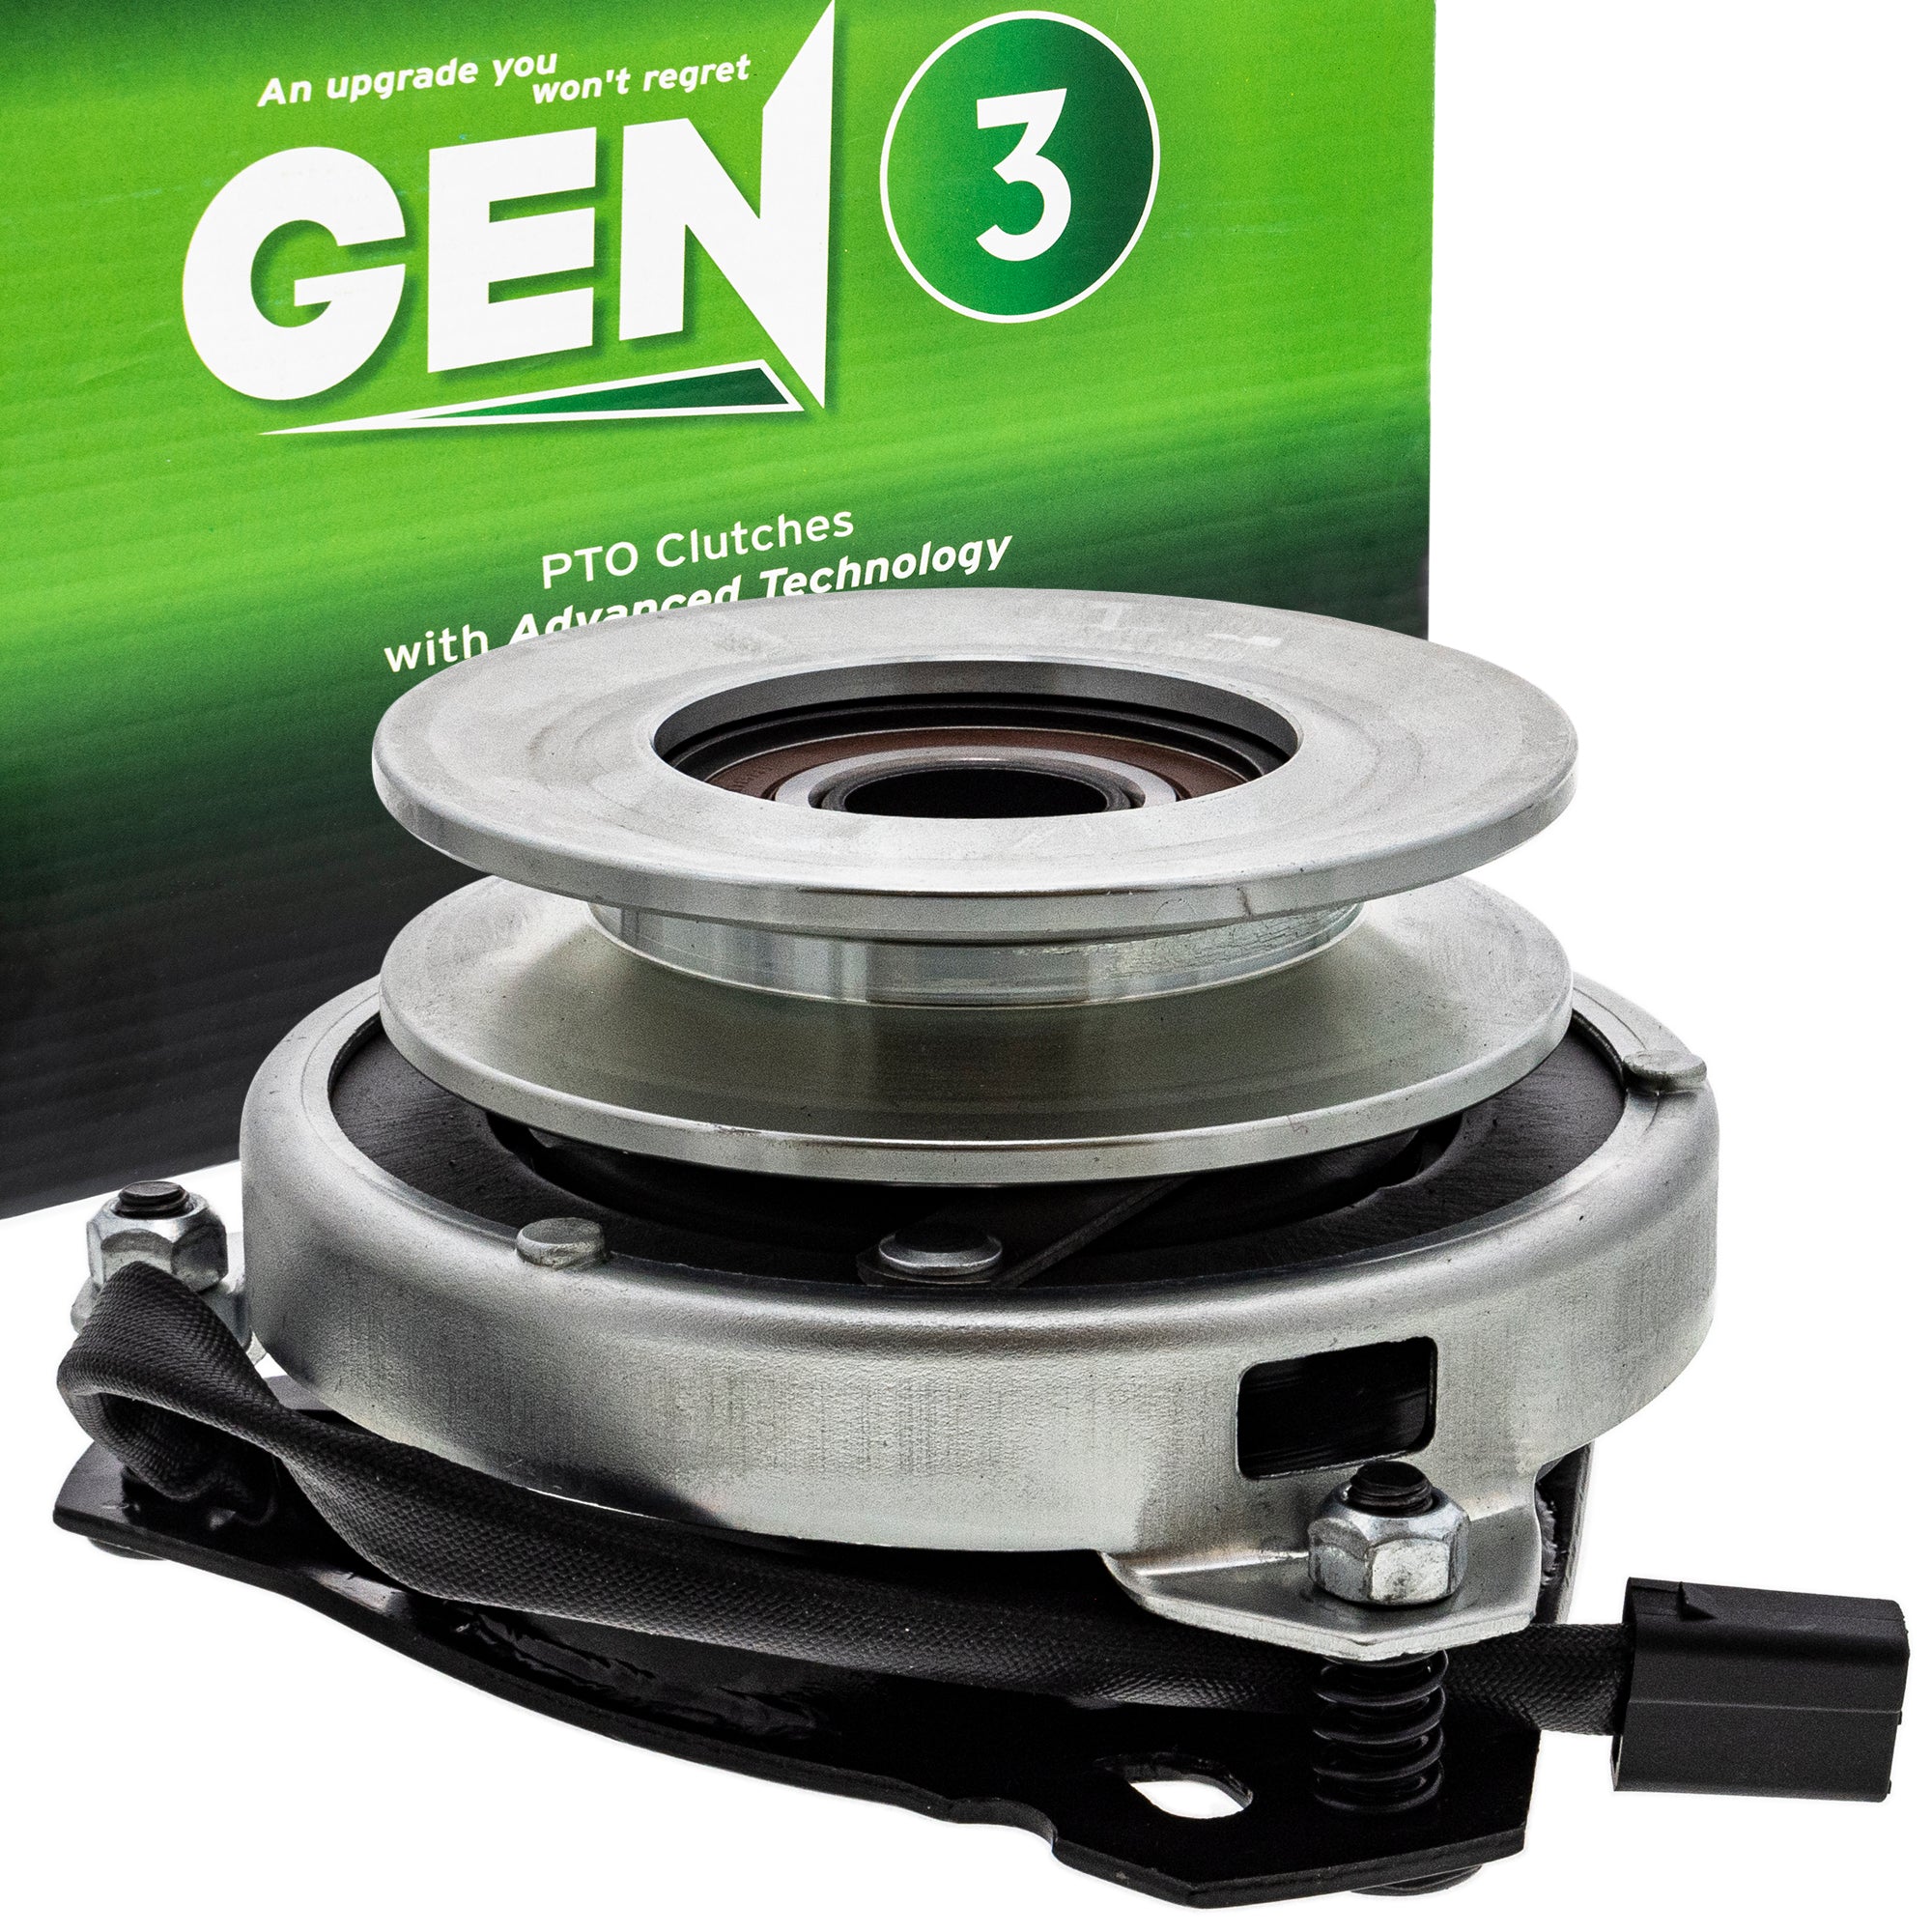 Gen 3 Electric PTO Clutch for Warner Replaces 5215-74 5210-53